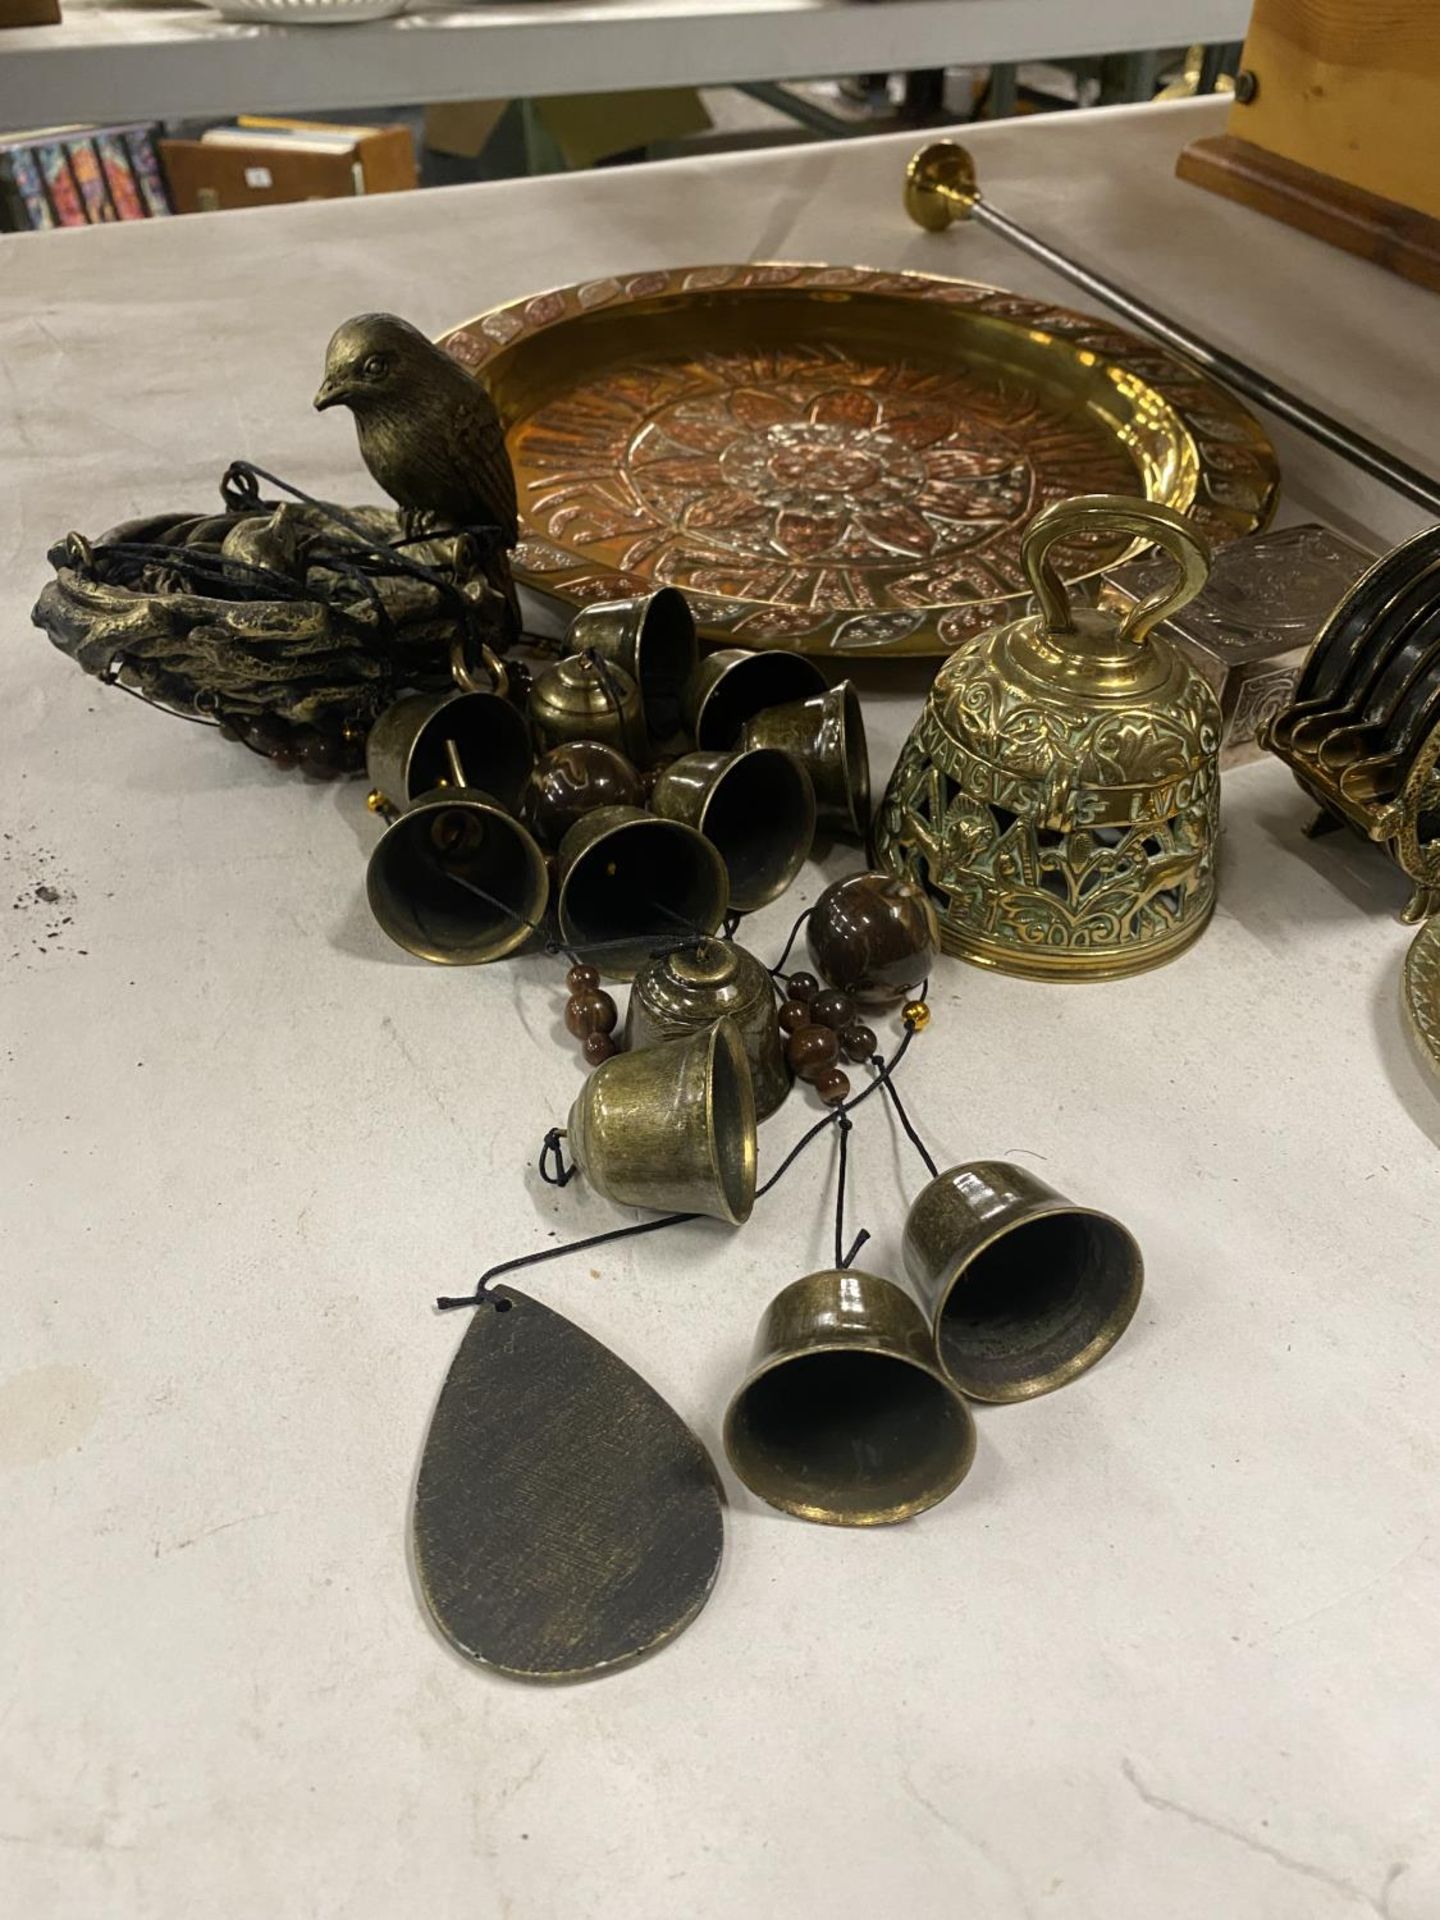 A QUANTITY OF BRASSWARE TO INCLUDE A 'BIRD' WINDCHIME, COASTERS WITH EMBOSSED LIONS, A BOX, PLATE, - Image 3 of 4